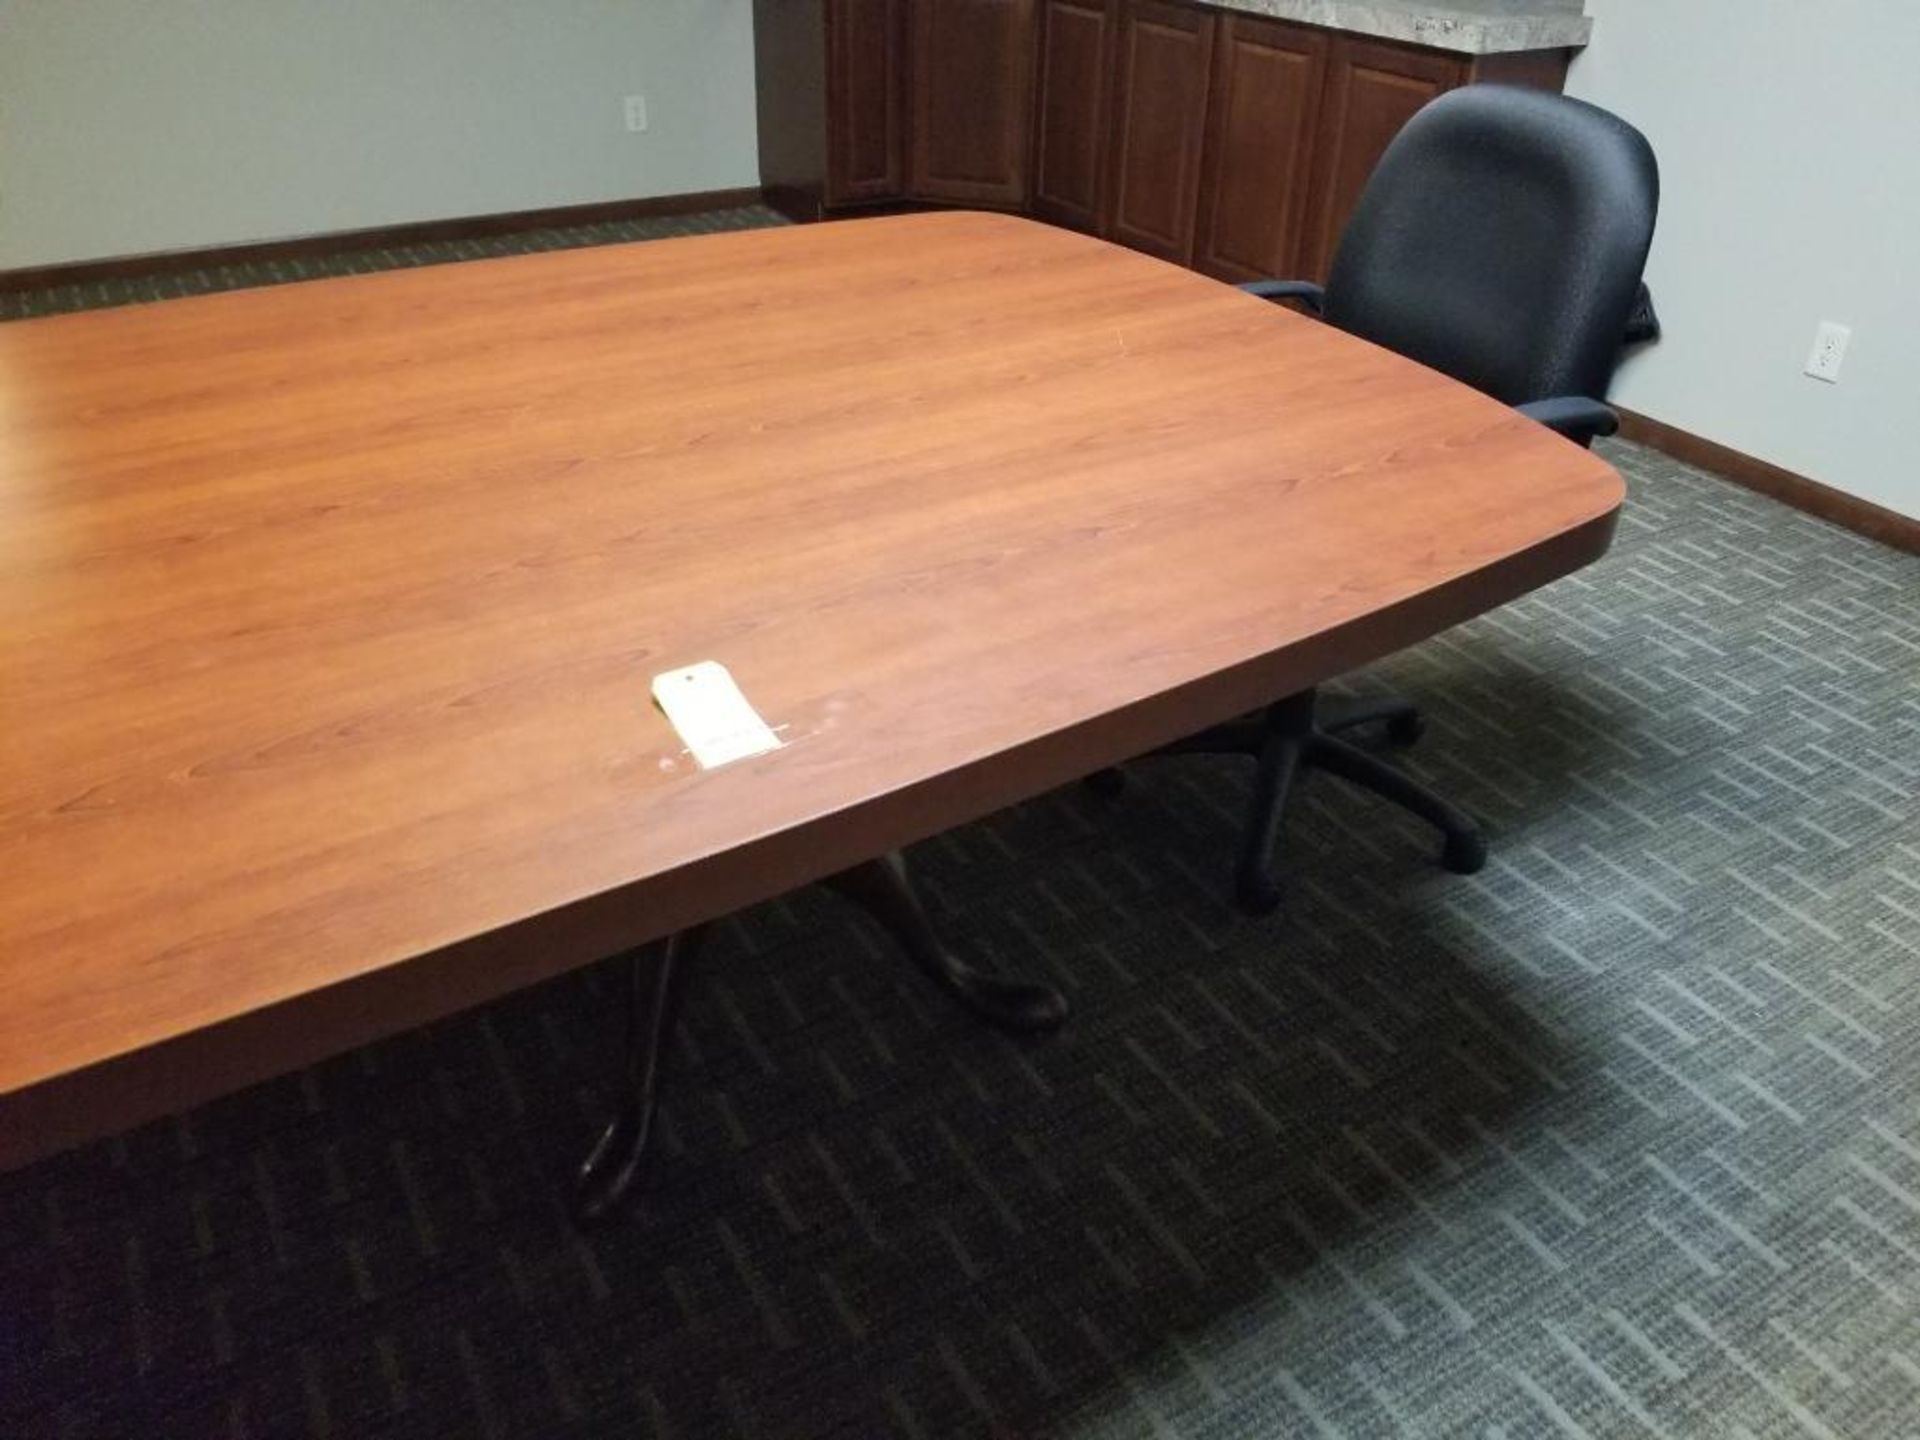 Office conference table 167x59x31 inches LxWxH. W/ two chairs. - Image 2 of 5